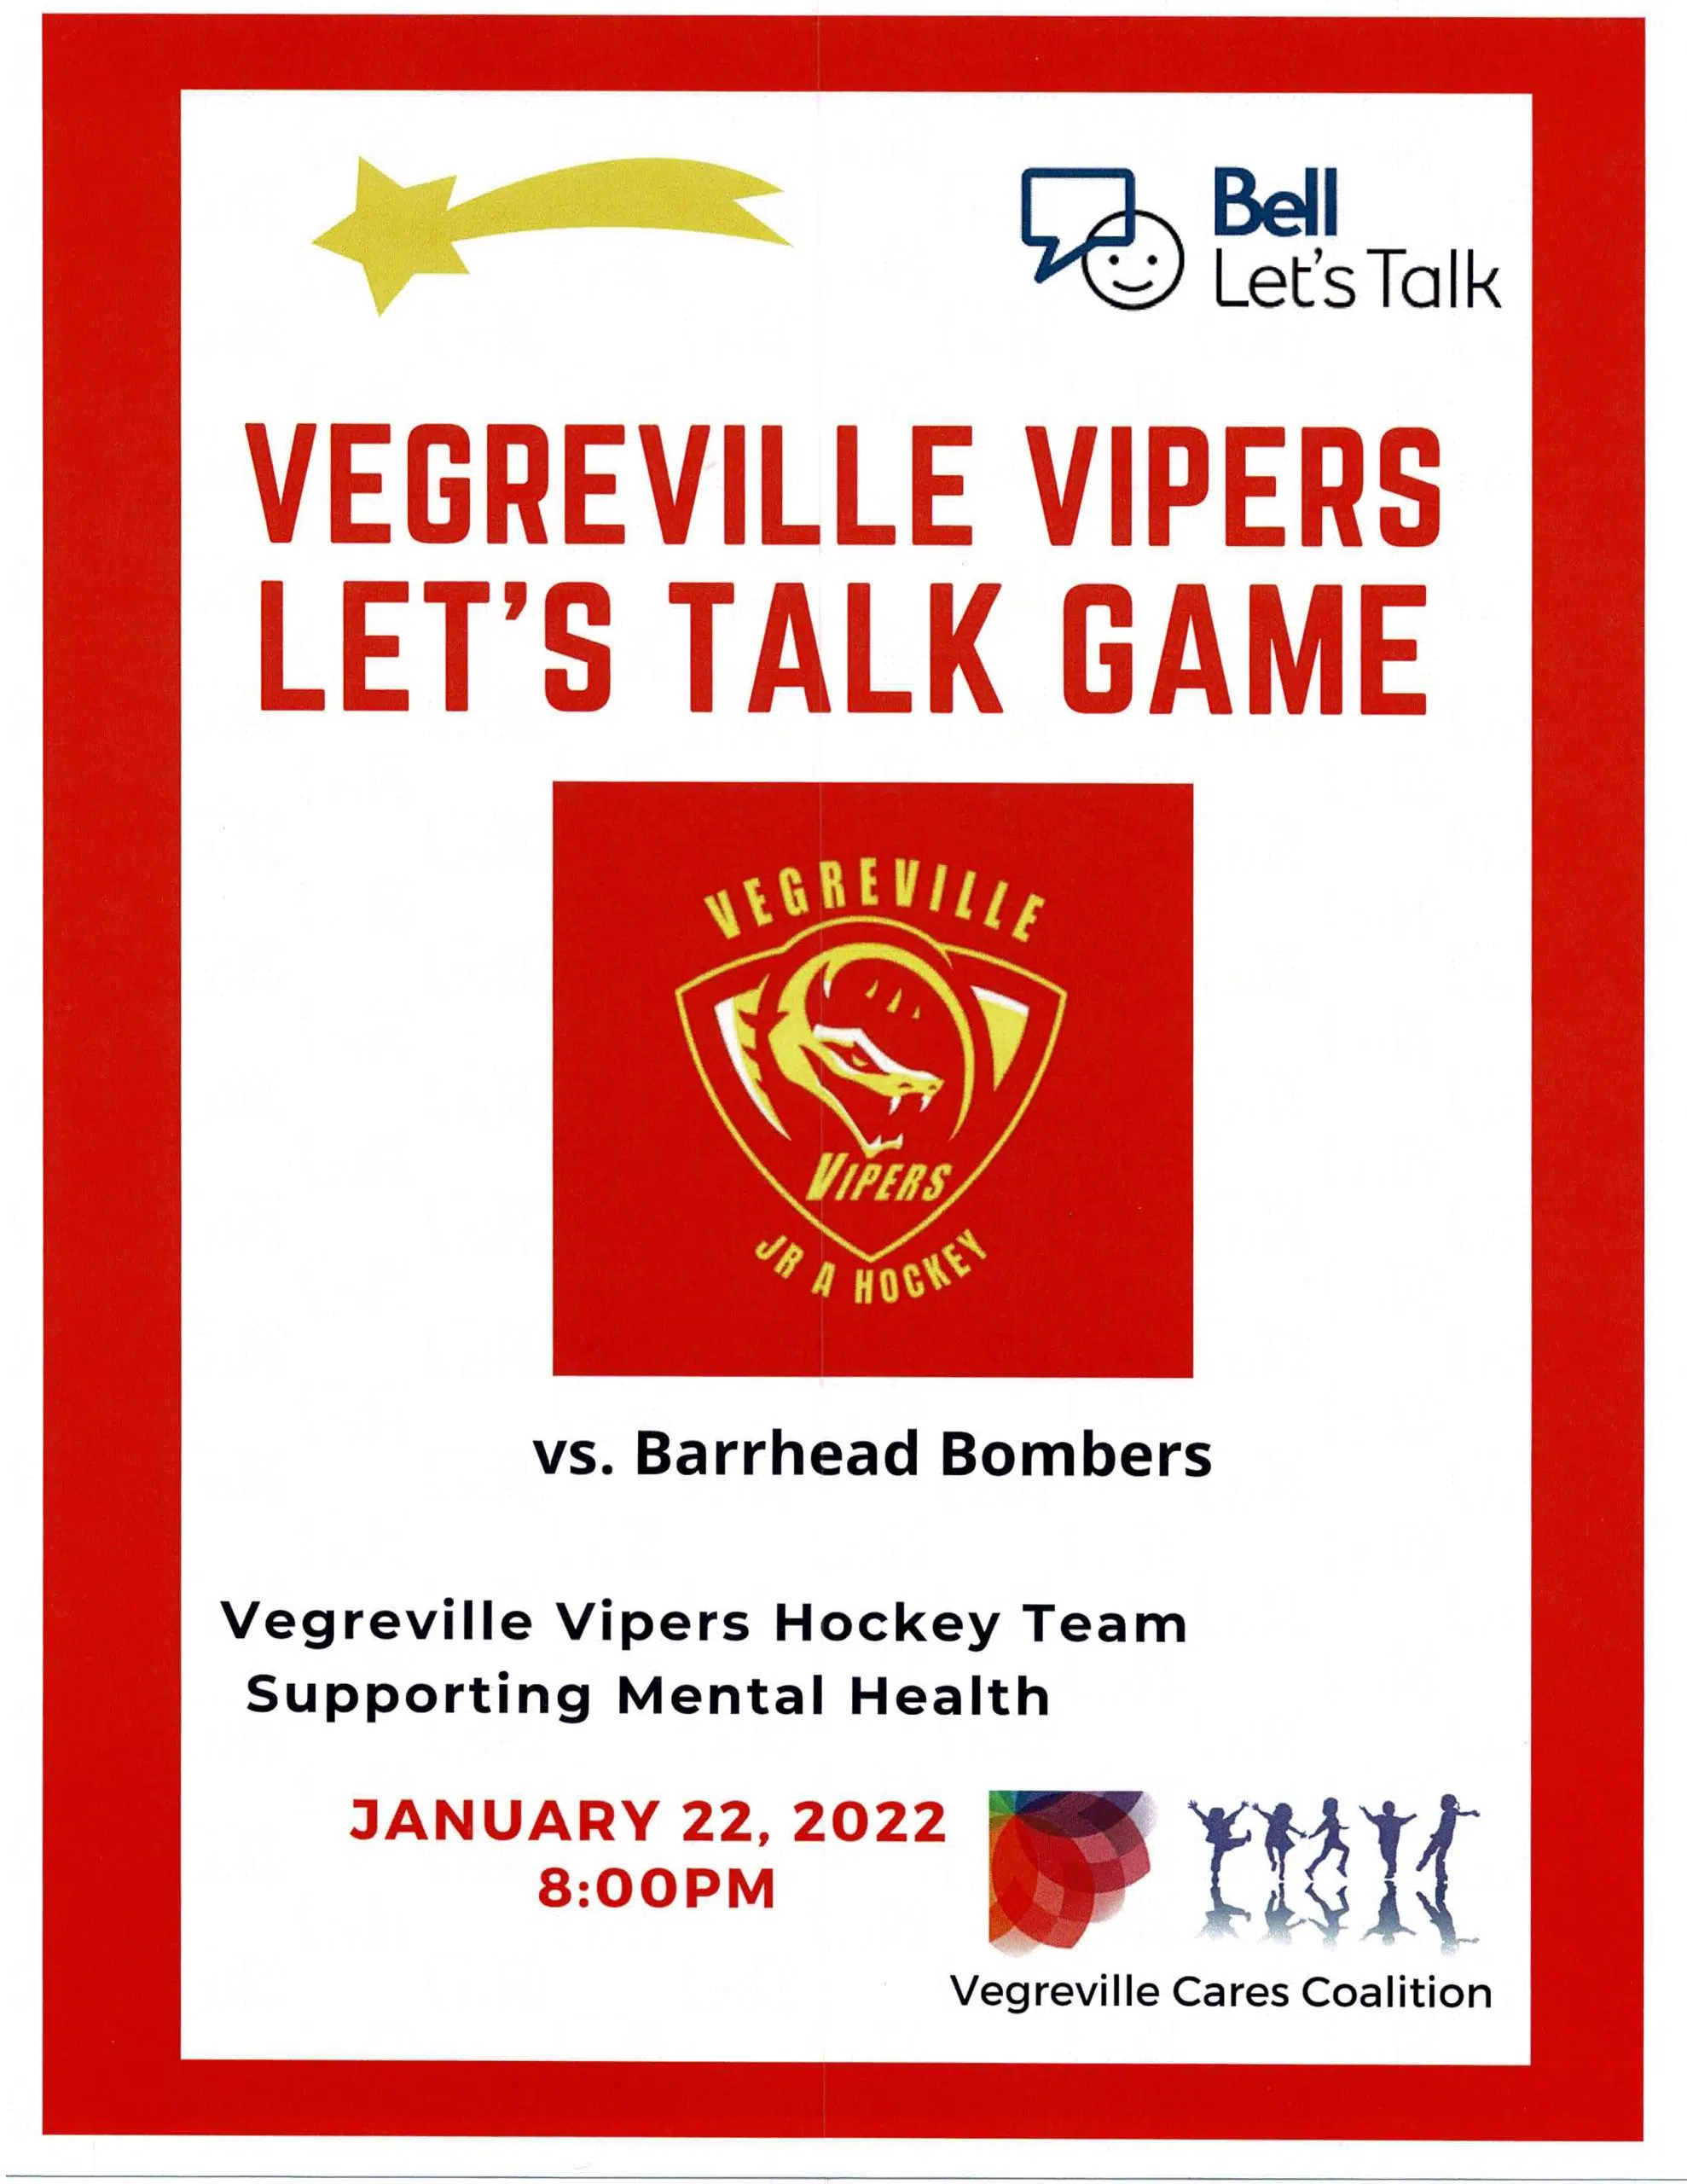 Vegreville Vipers - Let's Talk Game On January 22nd